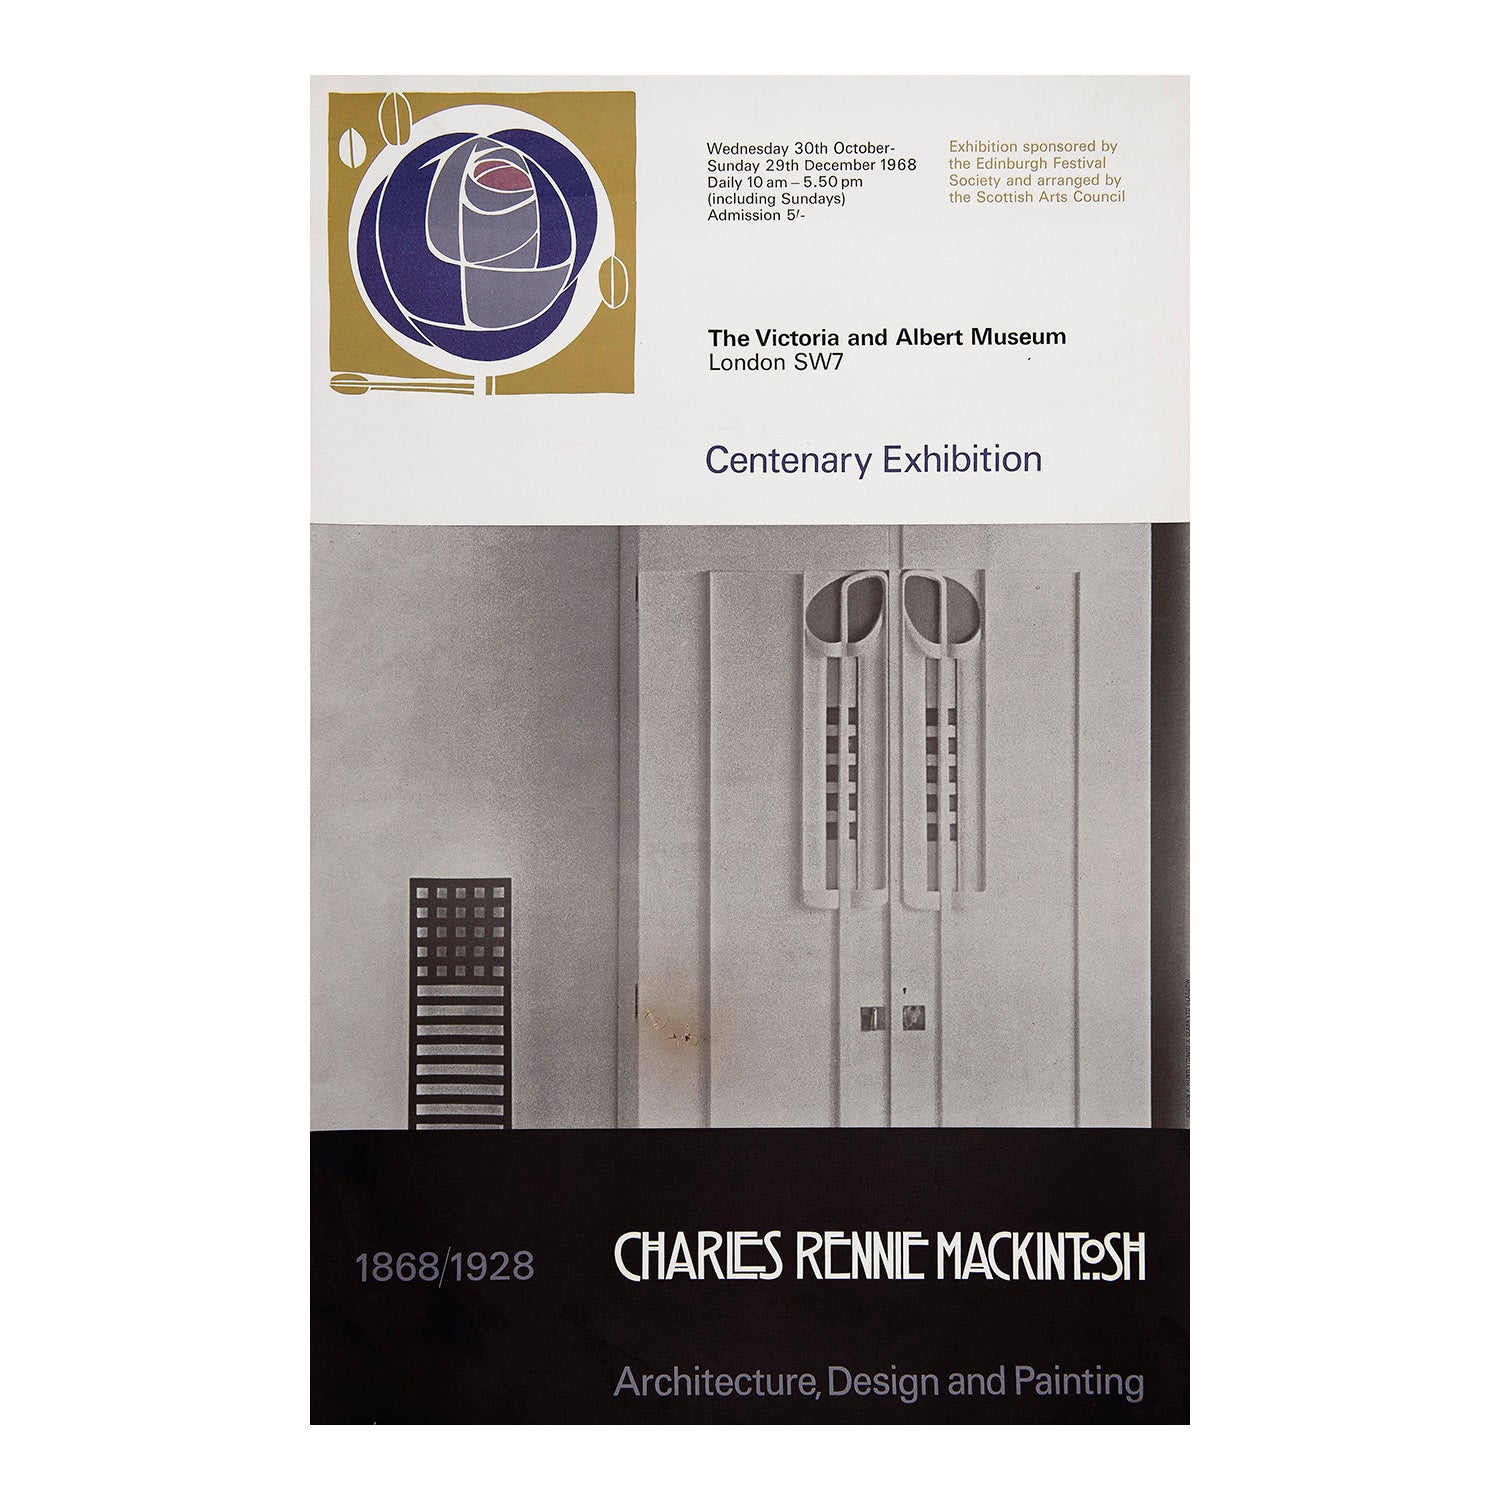 Charles Rennie Mackintosh. Architecture, Design and Painting